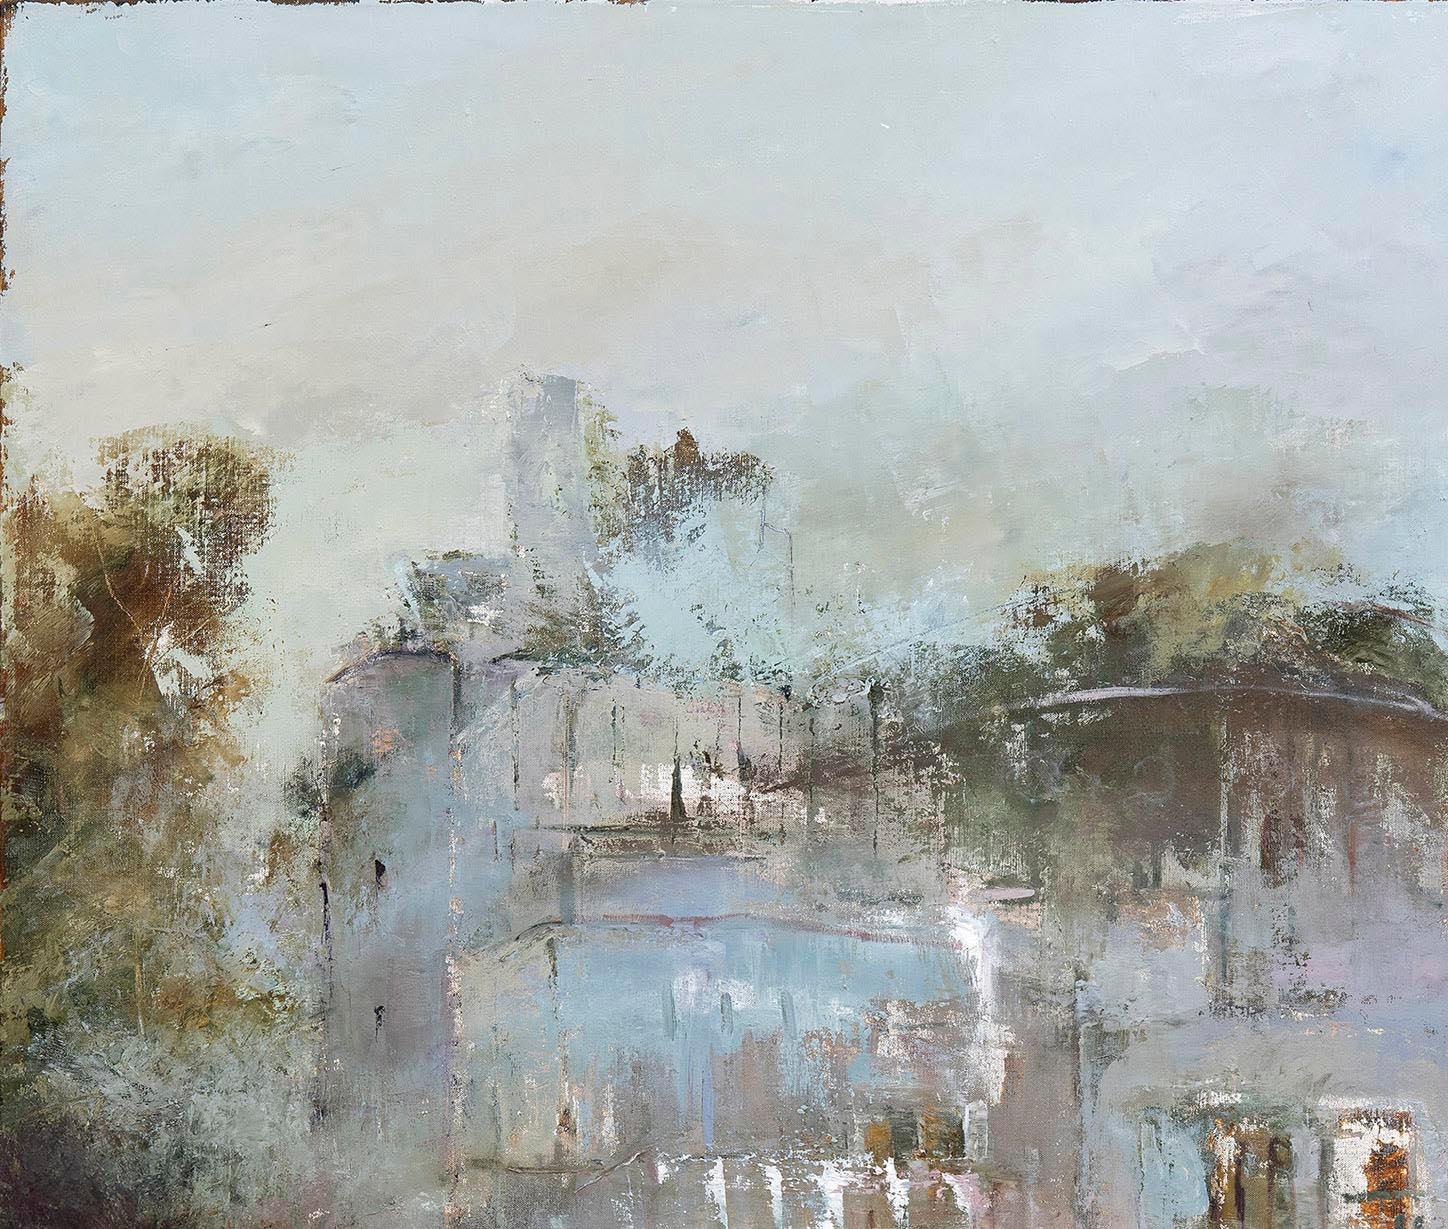 In This Timid Room Hopes Have Played - Painting by France Jodoin